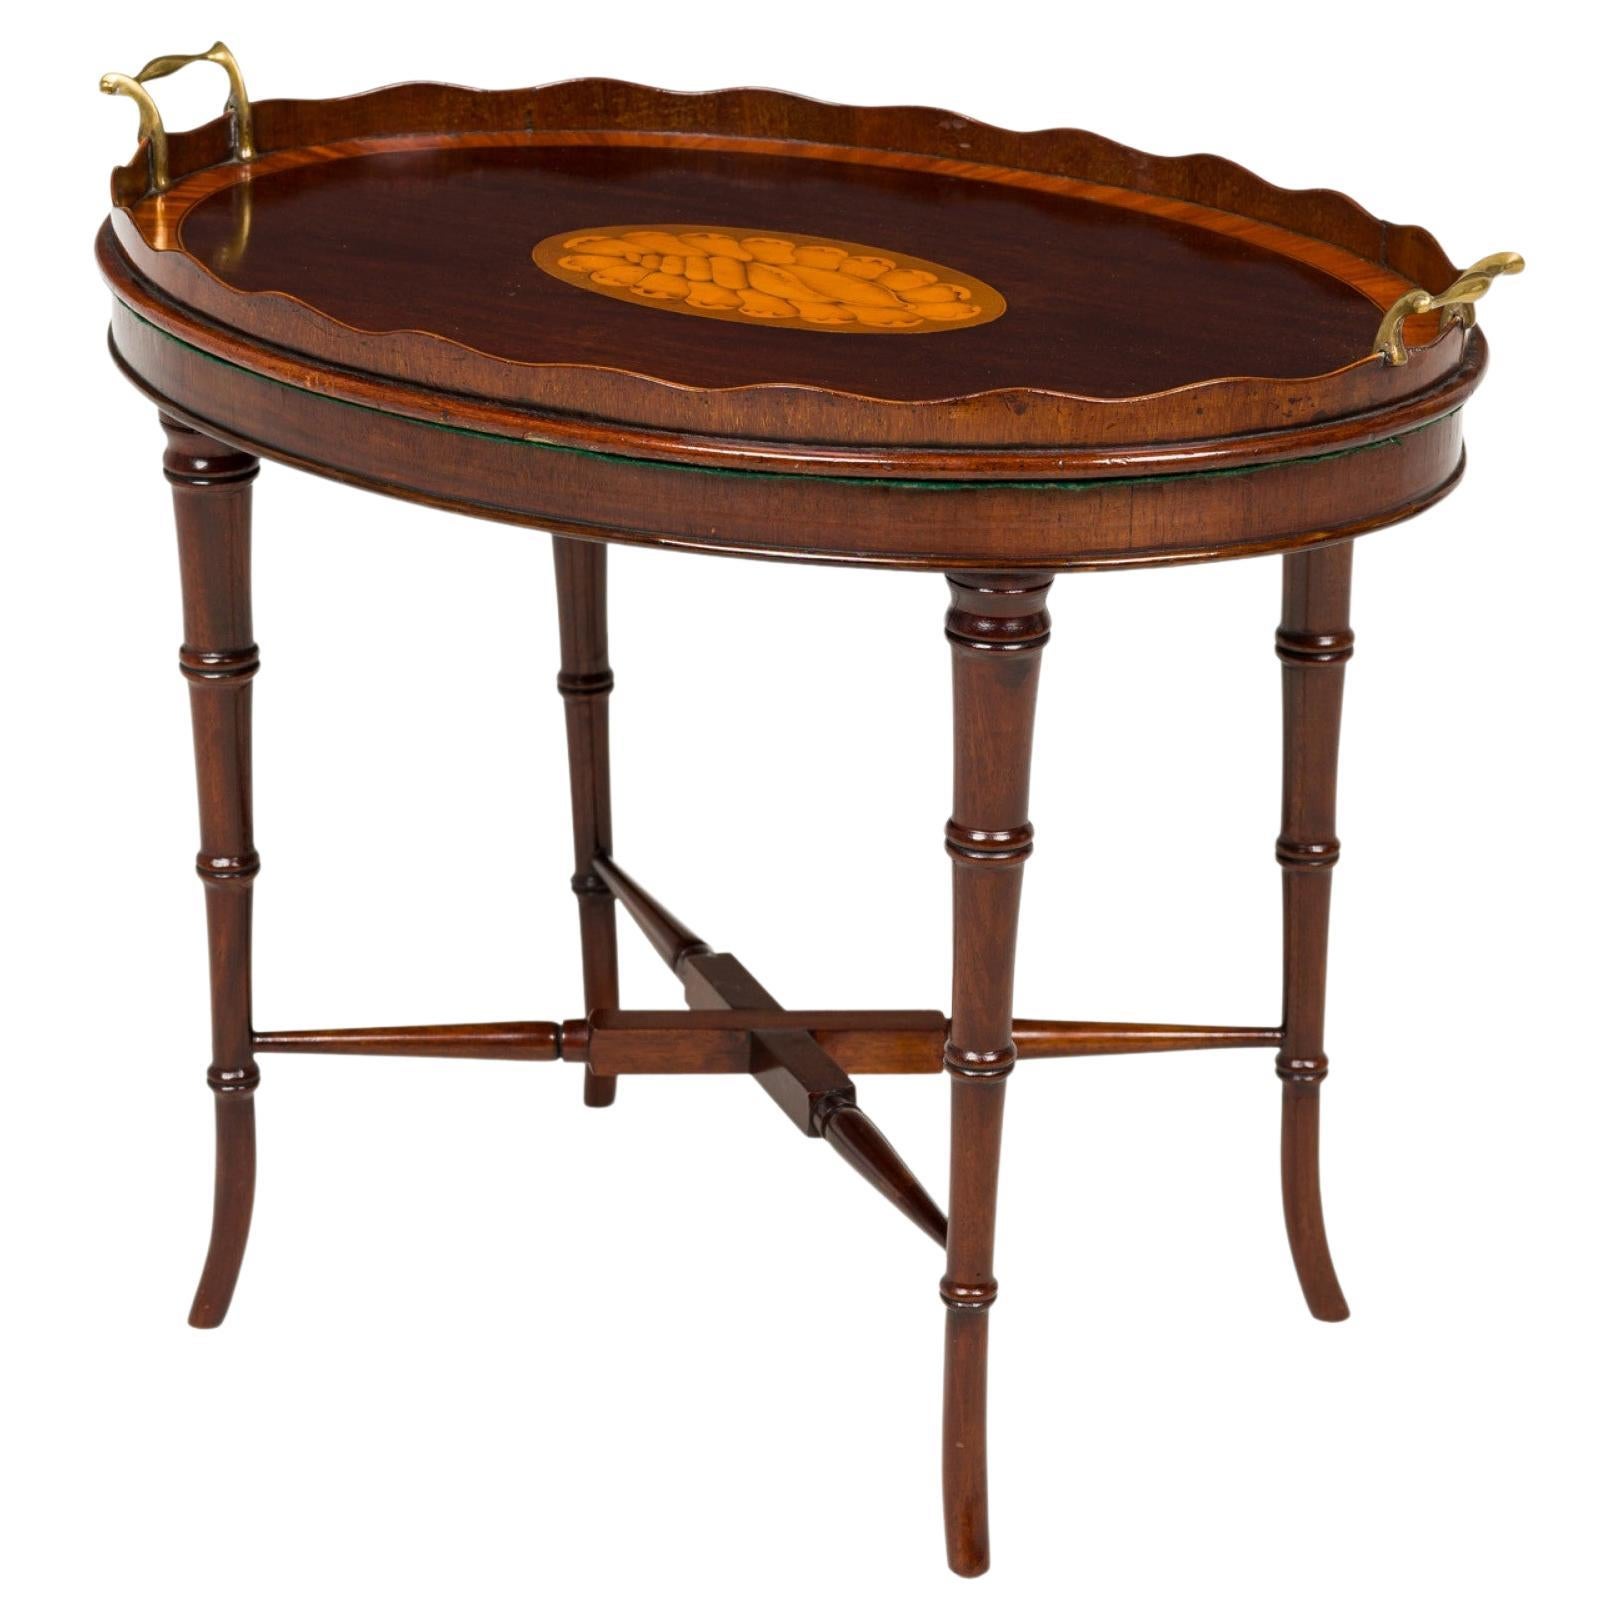 English Georgian Style Wood Tray Top Serving Table with Inlaid Conch Design